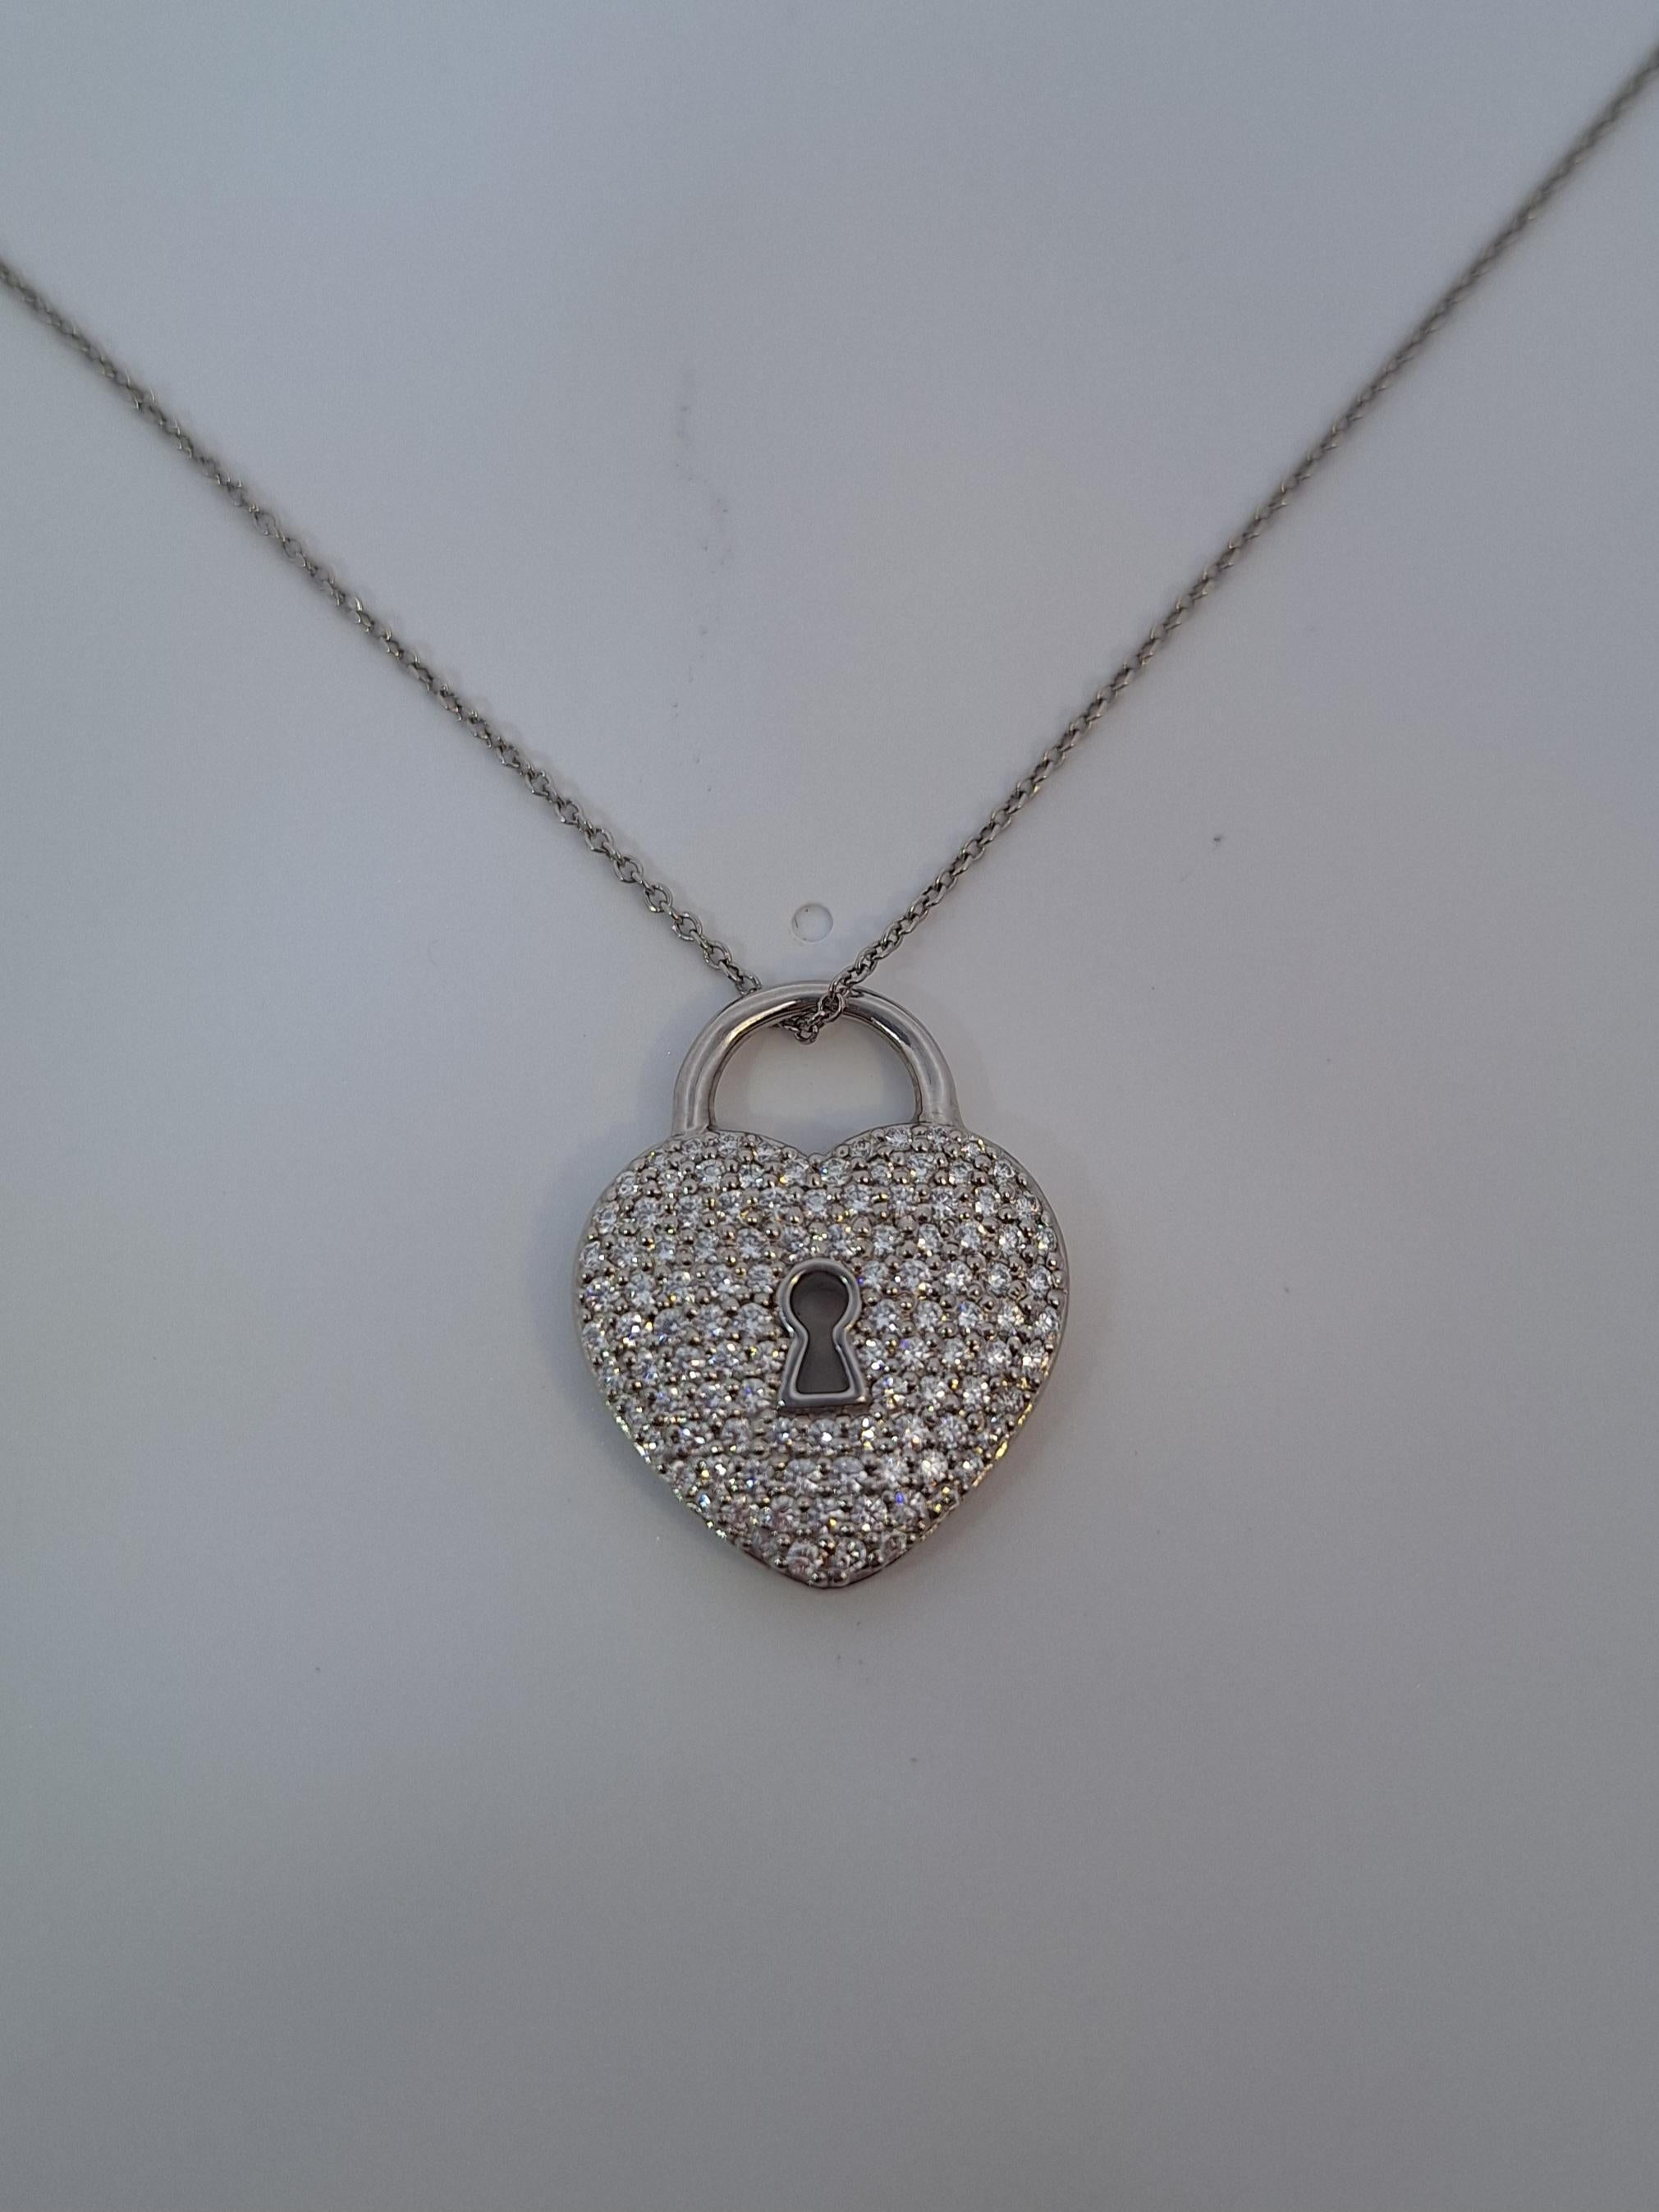 Tiffany & Co Platinum Diamond Heart Pendant Necklace In Excellent Condition For Sale In New York, NY